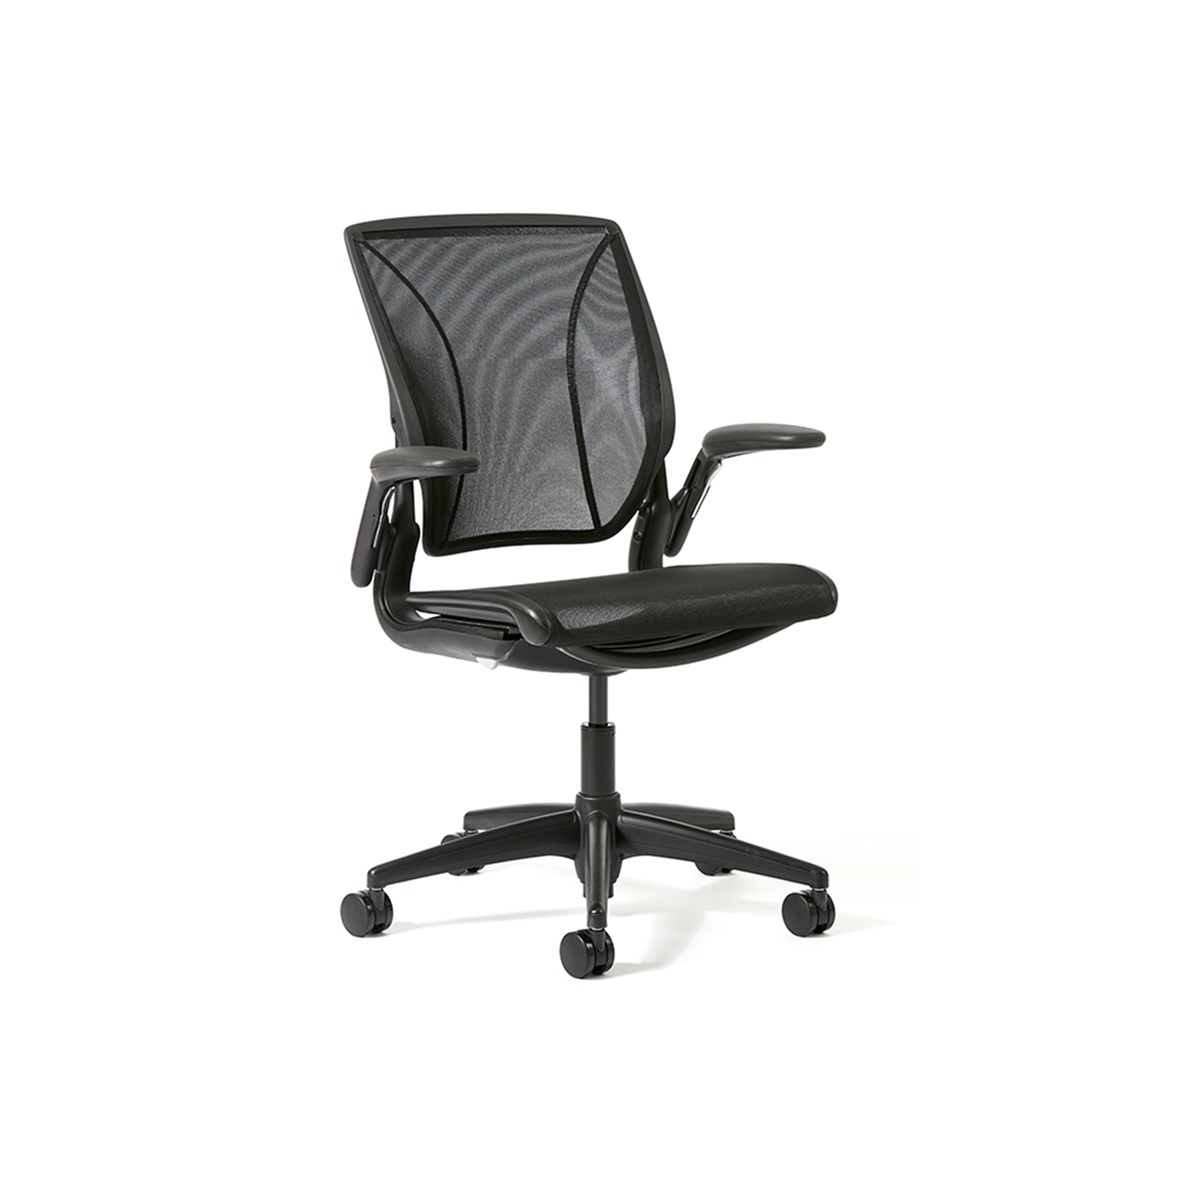 Humanscale-Niels-Diffrient-World-One-Task-Chair-Matisse-1